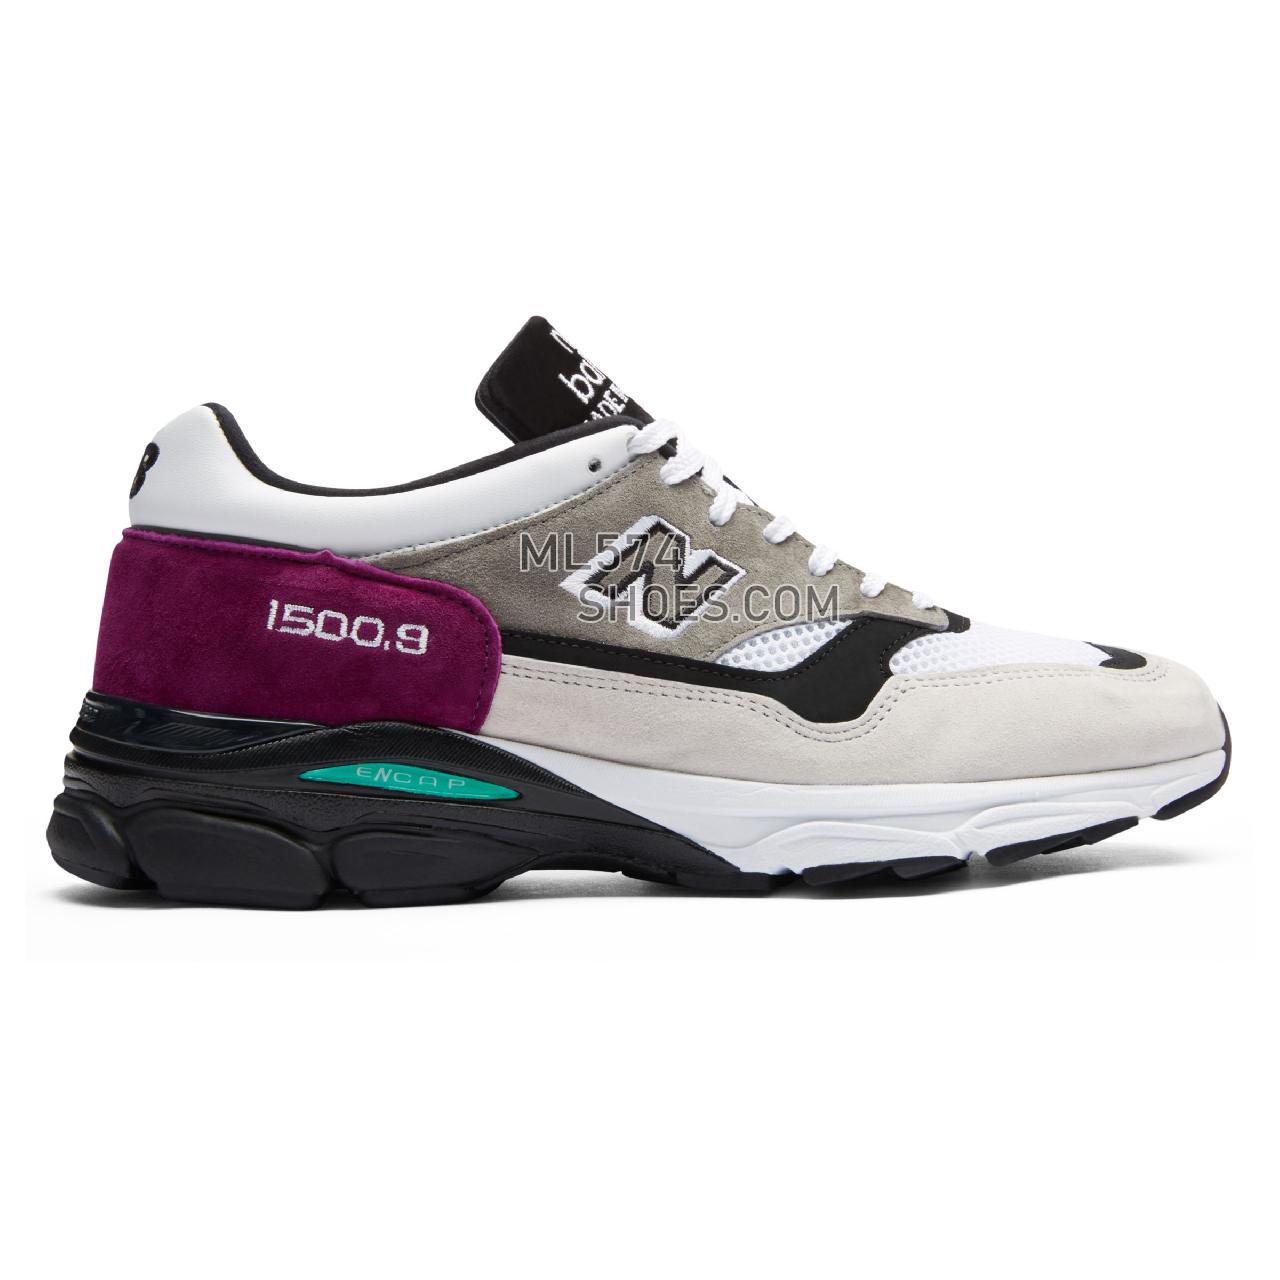 New Balance Made in UK 1500.9 - Men's 1500.9 Made in UK - Light Grey with Claret and Black - M15009EC